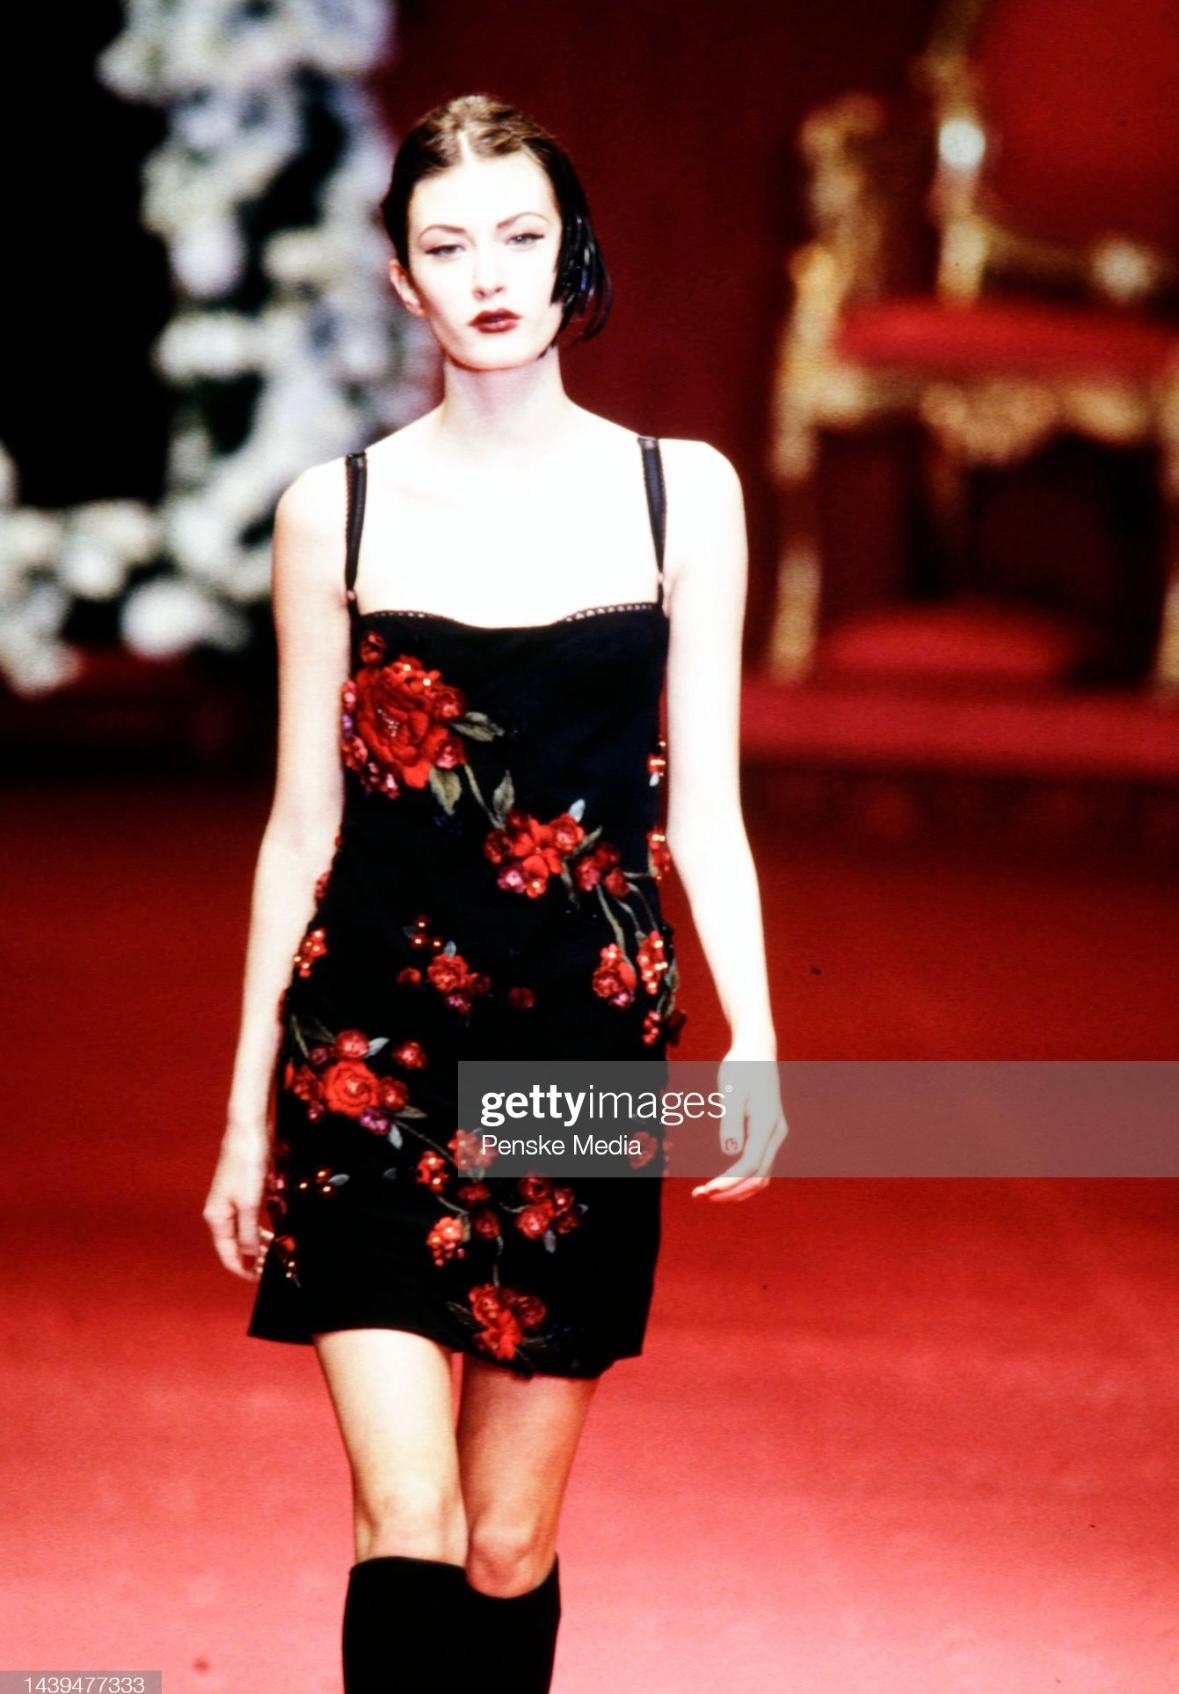 Presenting a beautiful black and red floral dress designed by Dolce and Gabbana for their Fall/Winter 1997 collection. This gorgeous square-neckline dress debuted on the season's runway covered in vibrant red flower appliqués. The dress has an